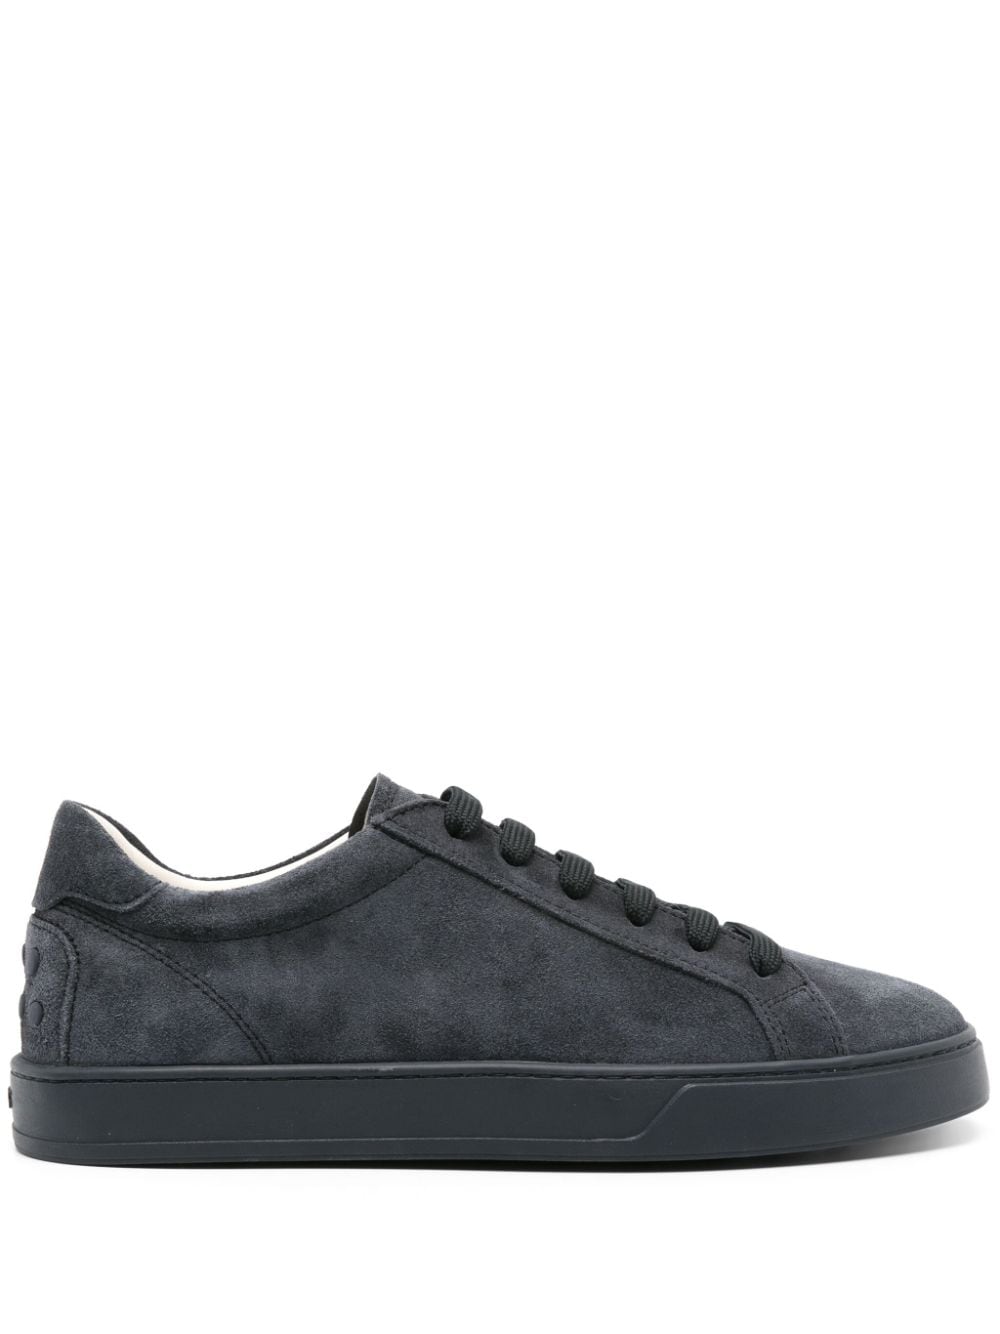 TOD'S Blue Suede Sneakers for Men - SS24 Collection